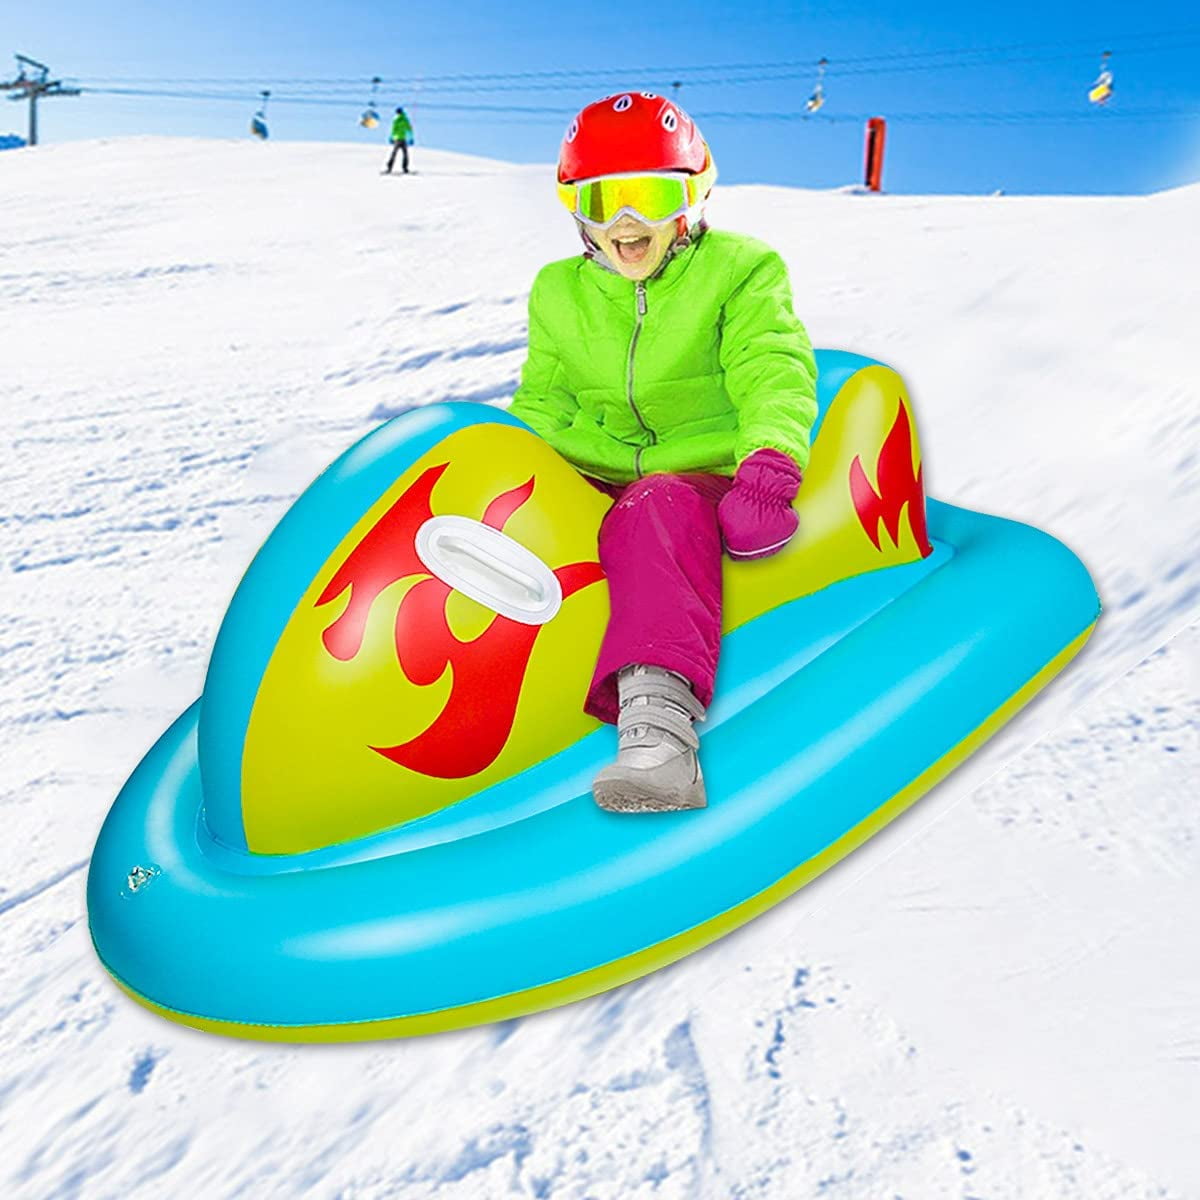 43 Inch Thickened Snow Sledding Tube for Outdoor Holidays Winter Snow Tube Heavy Duty Ski Snow Tube with Handles and Bottom Inflatable Snow Sled Toboggan for Kids and Adults 